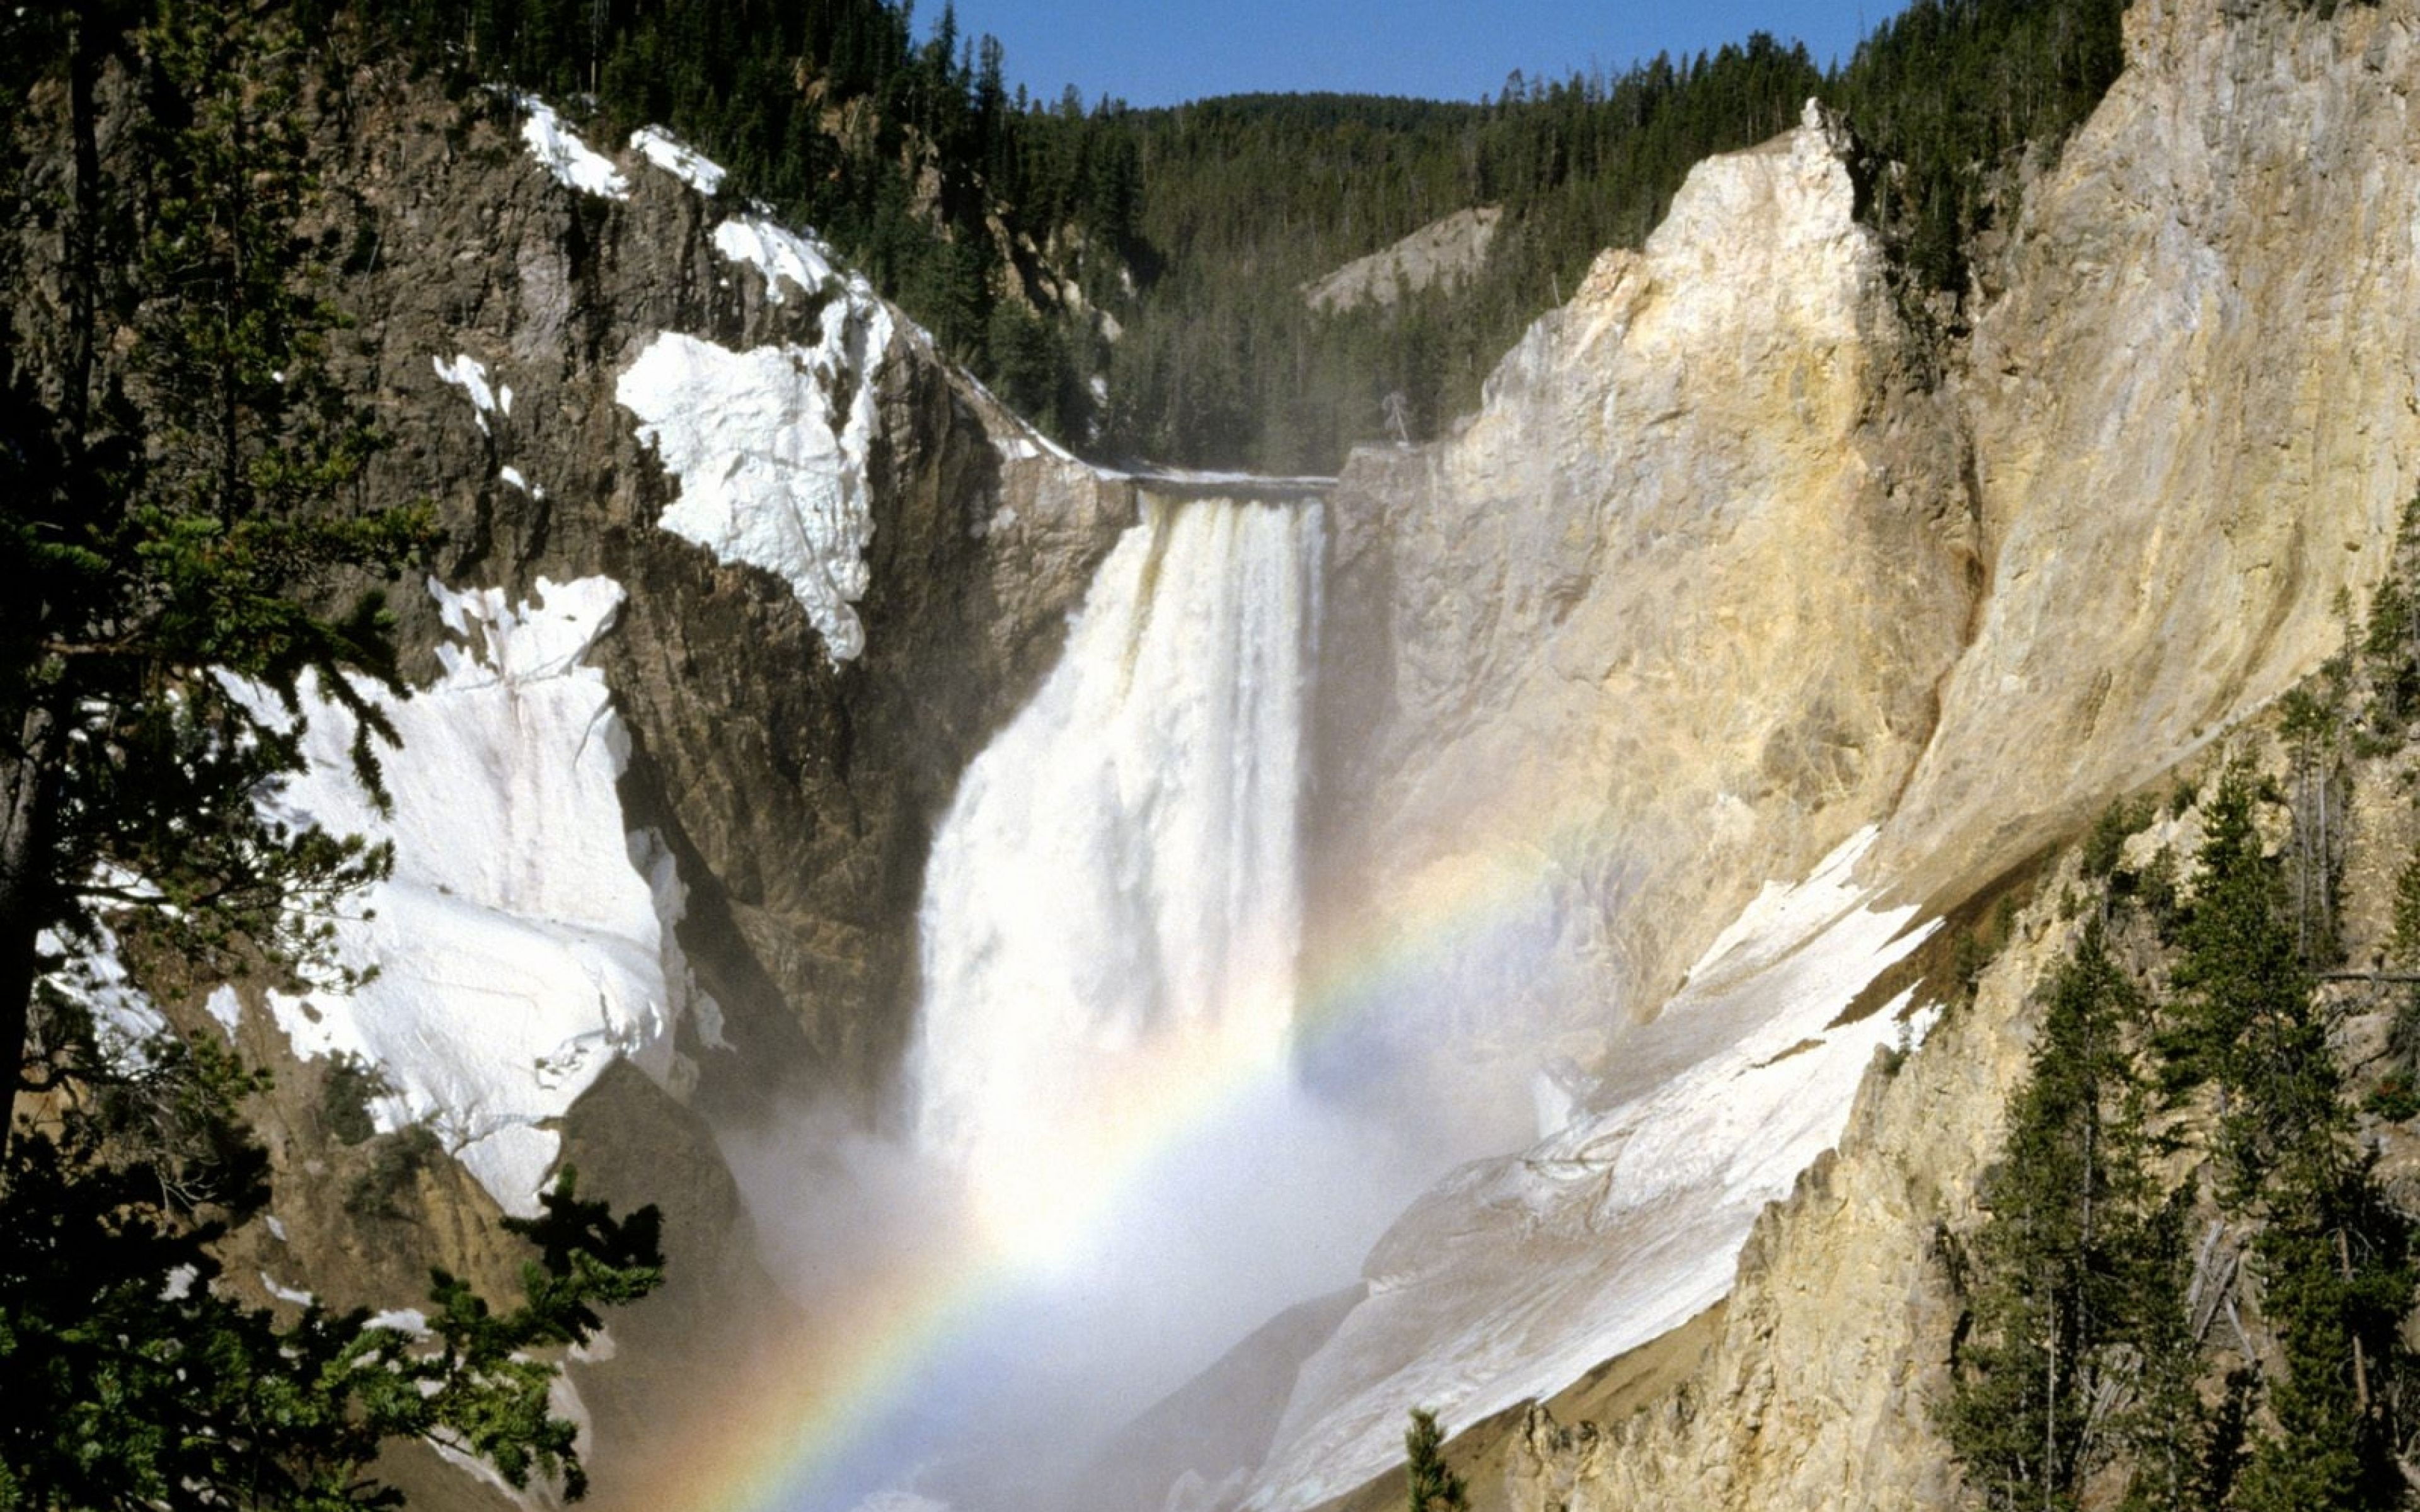 Download Wallpaper 3840x2400 Yellowstone national park, Wyoming